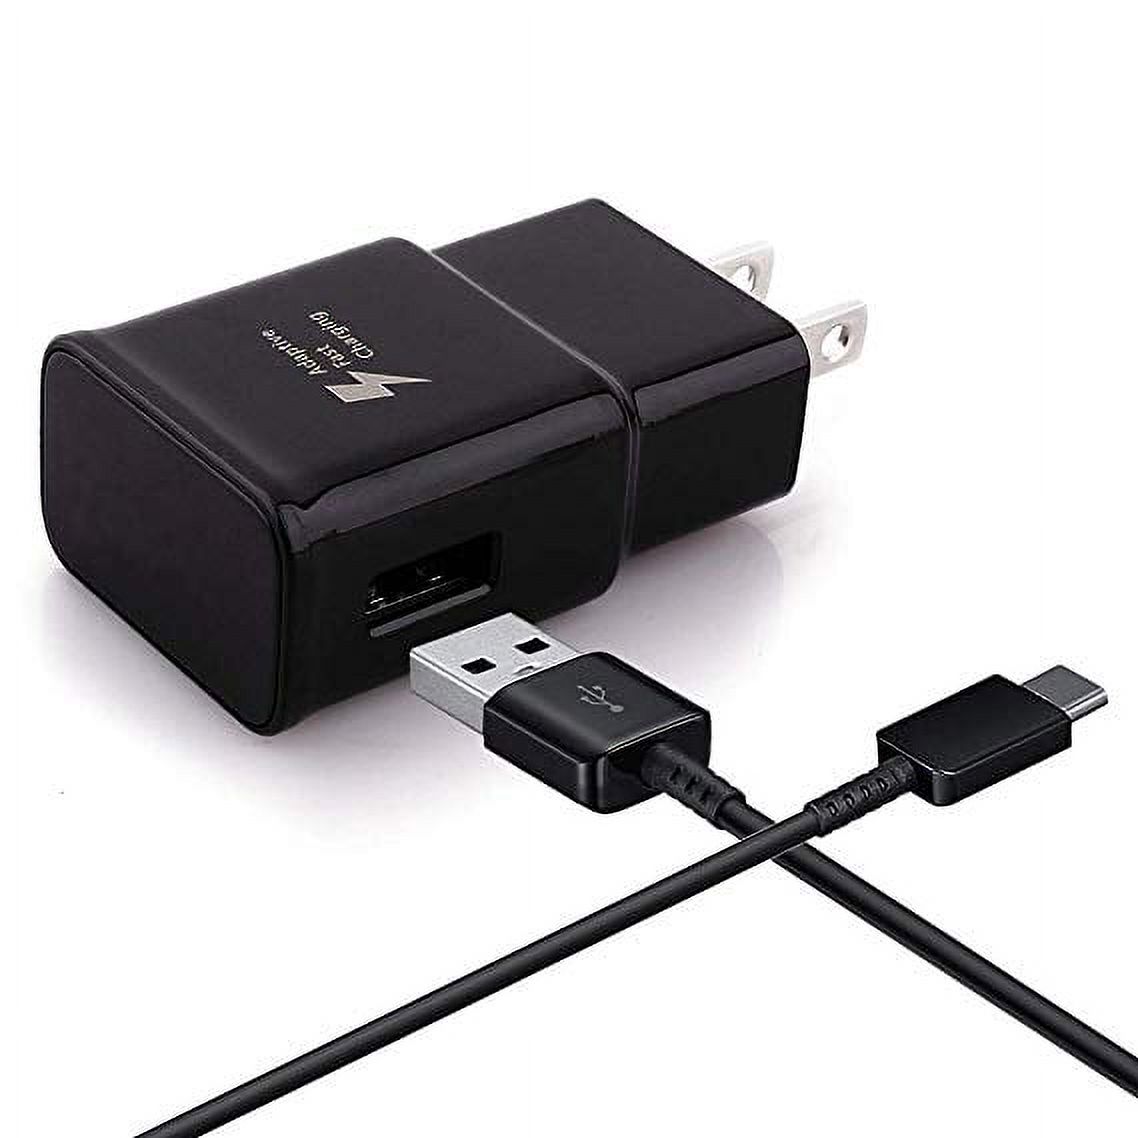 OEM Samsung Galaxy S8 S9 S10 LG G5 G6 G7 ThinQ One Fit Adaptive Fast Charger USB-C 3.1 Type-C Cable Kit Fast Charging USB Wall Charger AC Home Power Adapter [1 Wall Charger + 4 FT Type-C Cable] Black - image 1 of 7